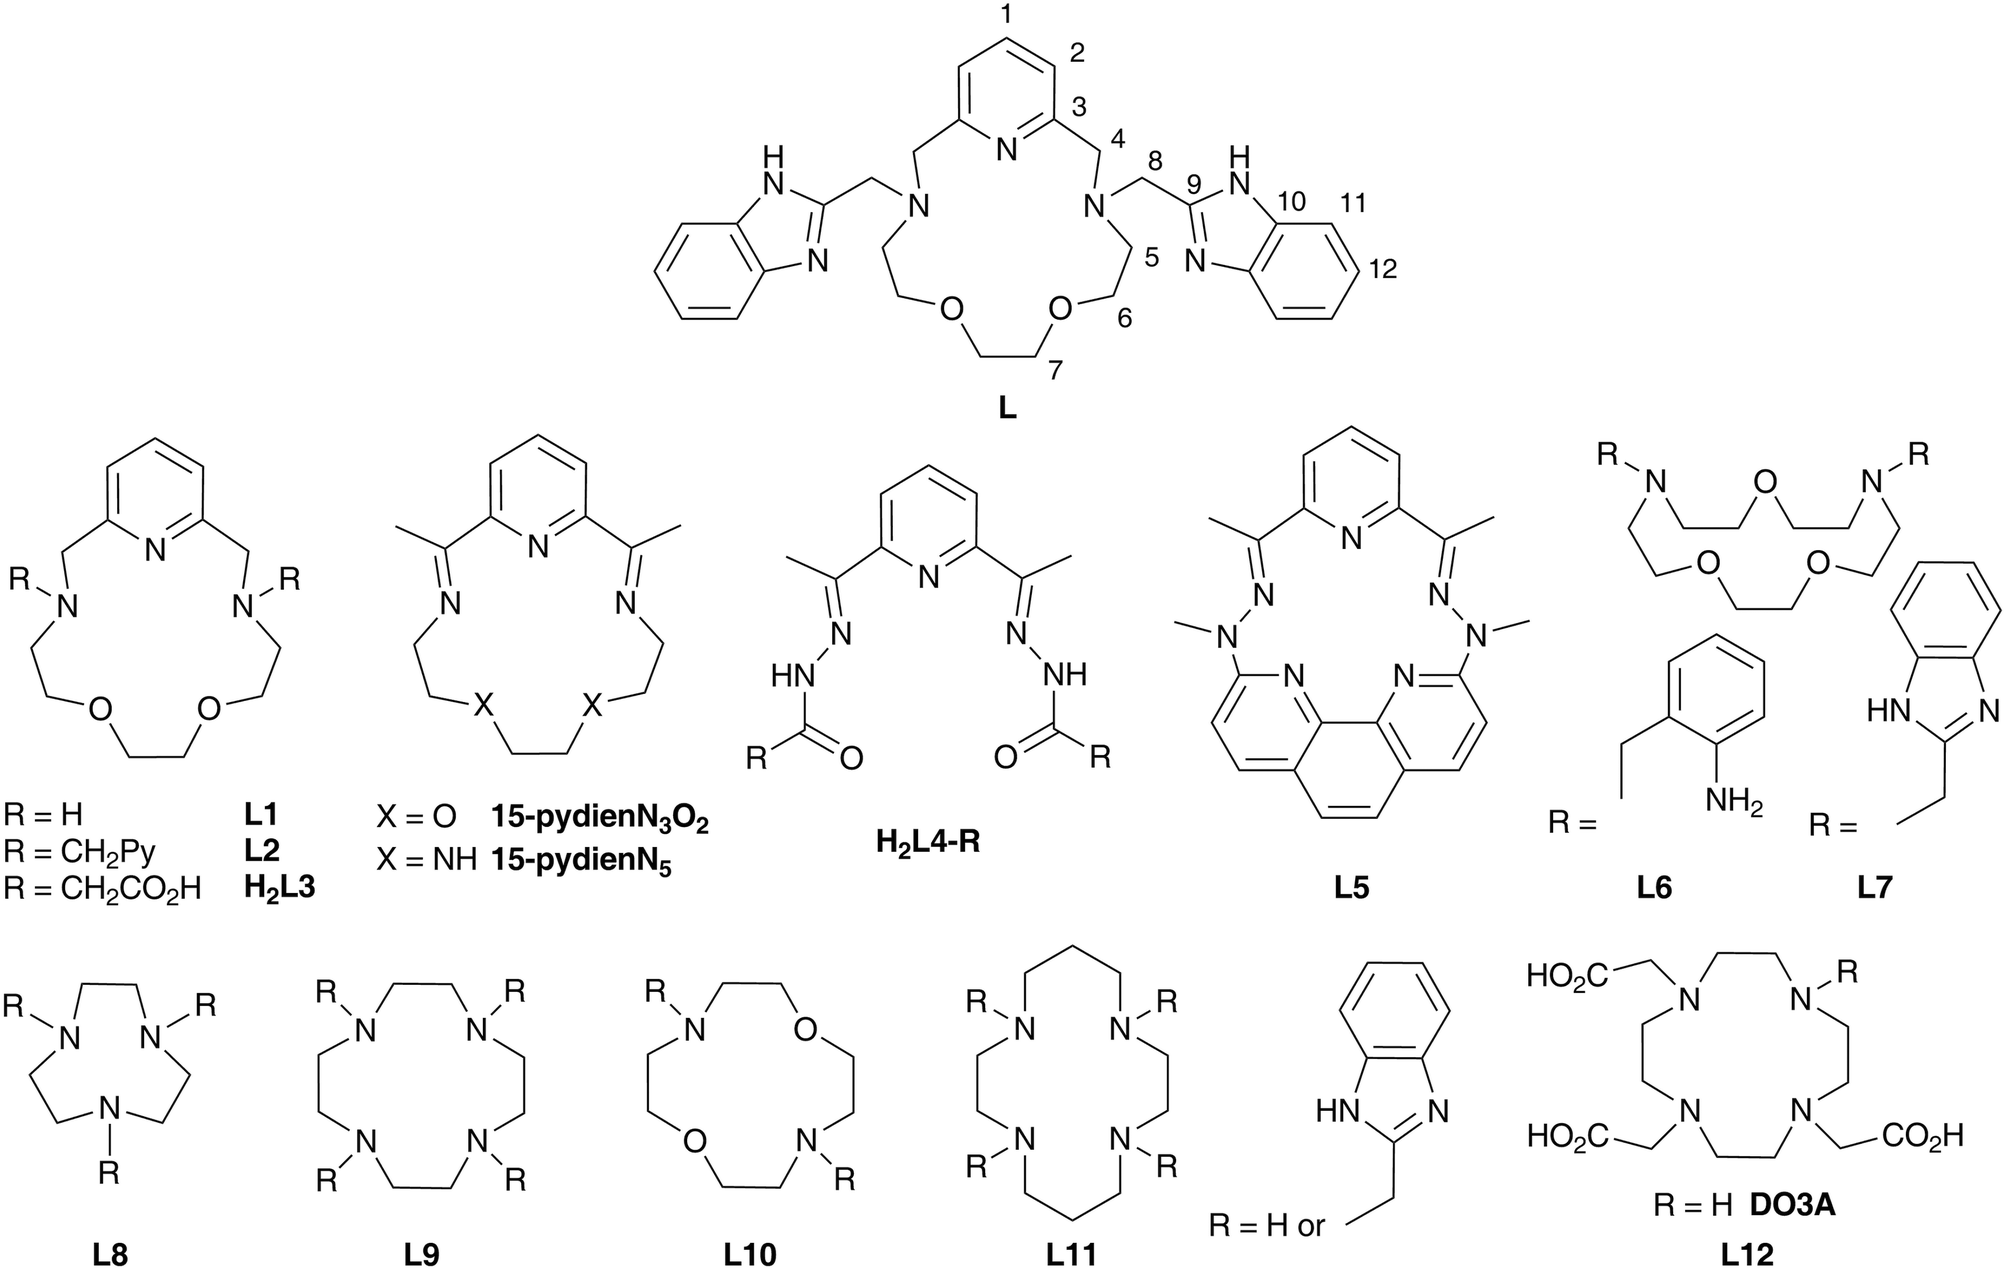 Structural Magnetic Redox And Theoretical Characterization Of Seven Coordinate First Row Transition Metal Complexes With A Macrocyclic Ligand Containing Two Benzimidazolyl N Pendant Arms Dalton Transactions Rsc Publishing